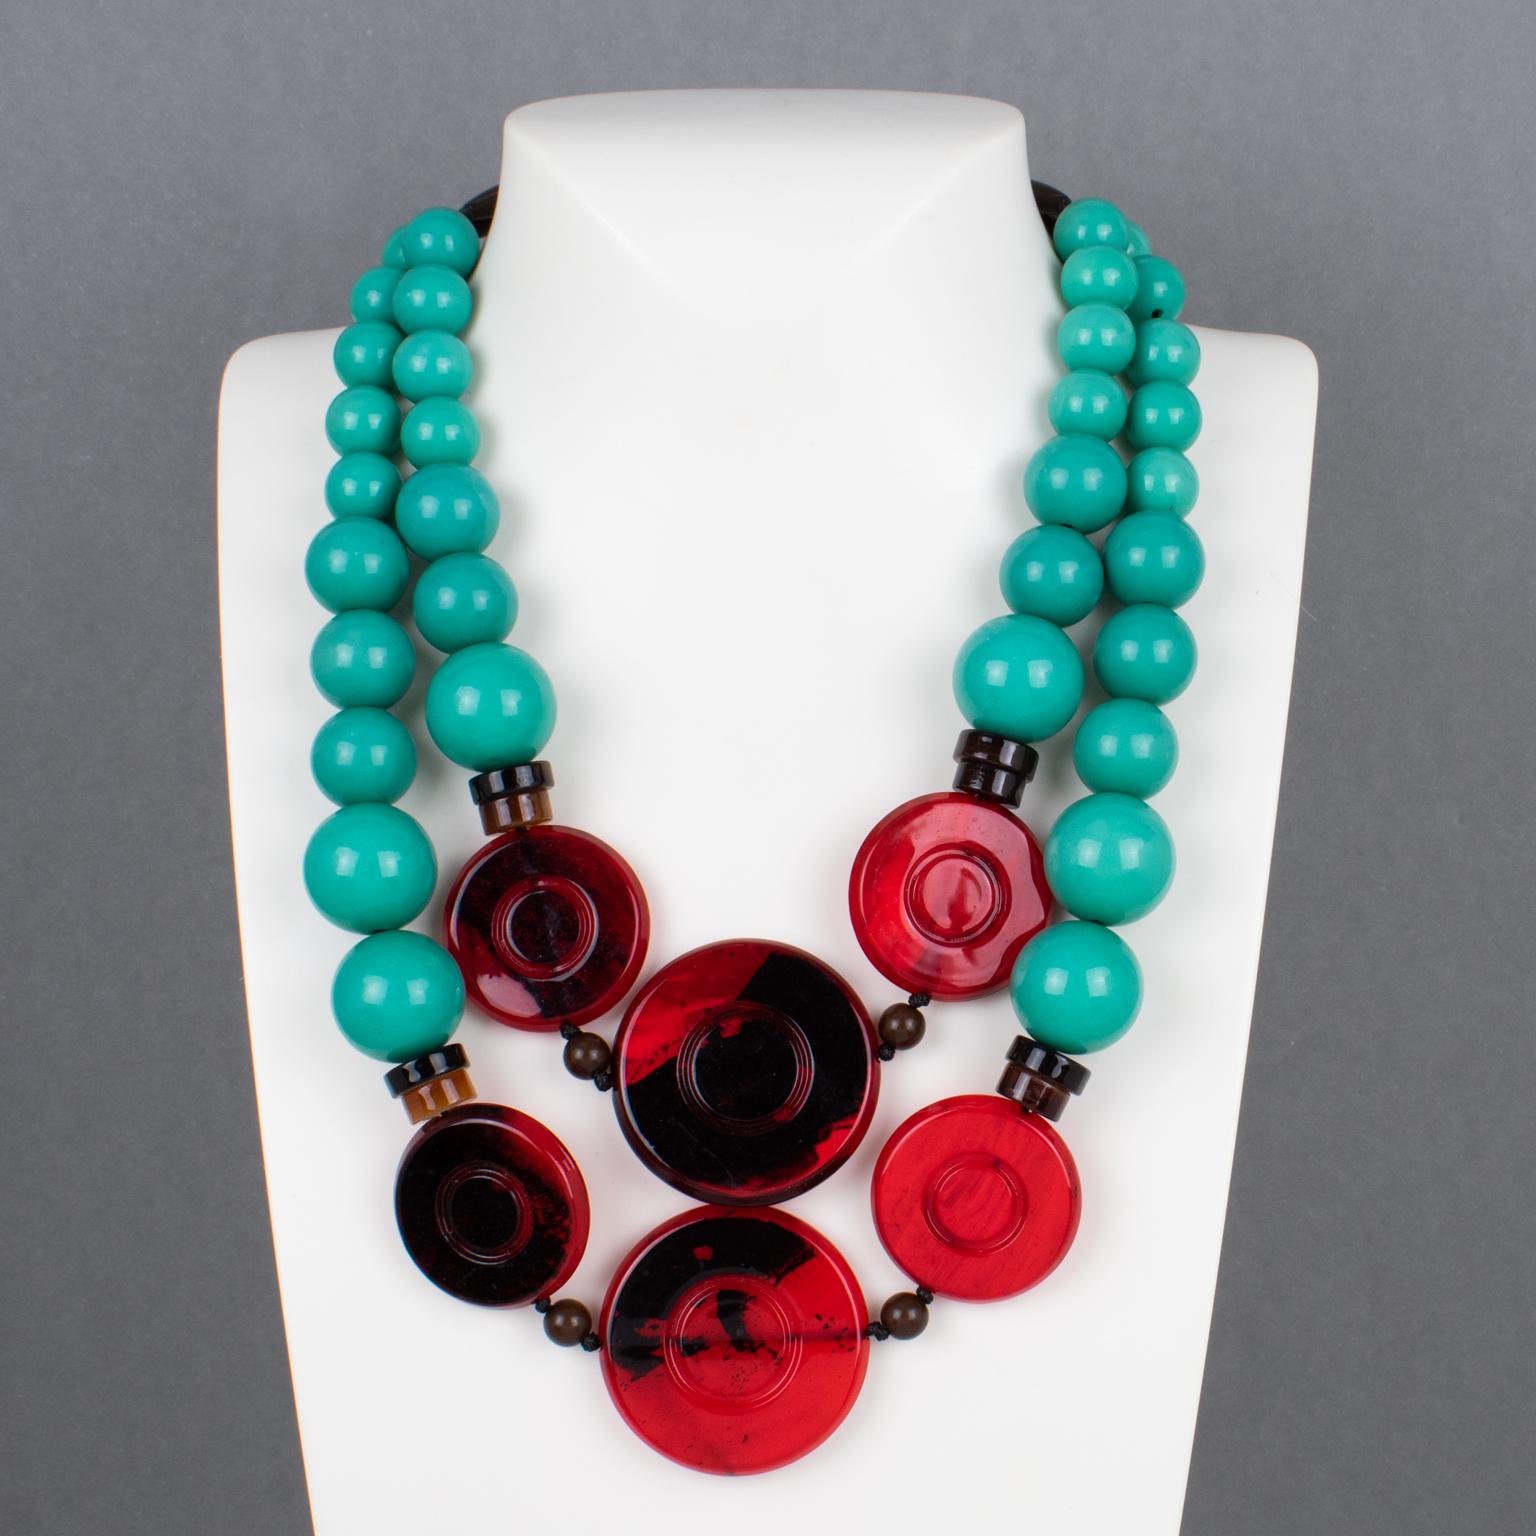 Modern Angela Caputi Multi-Strand Green Teal Choker Necklace Red and Black Pebbles For Sale